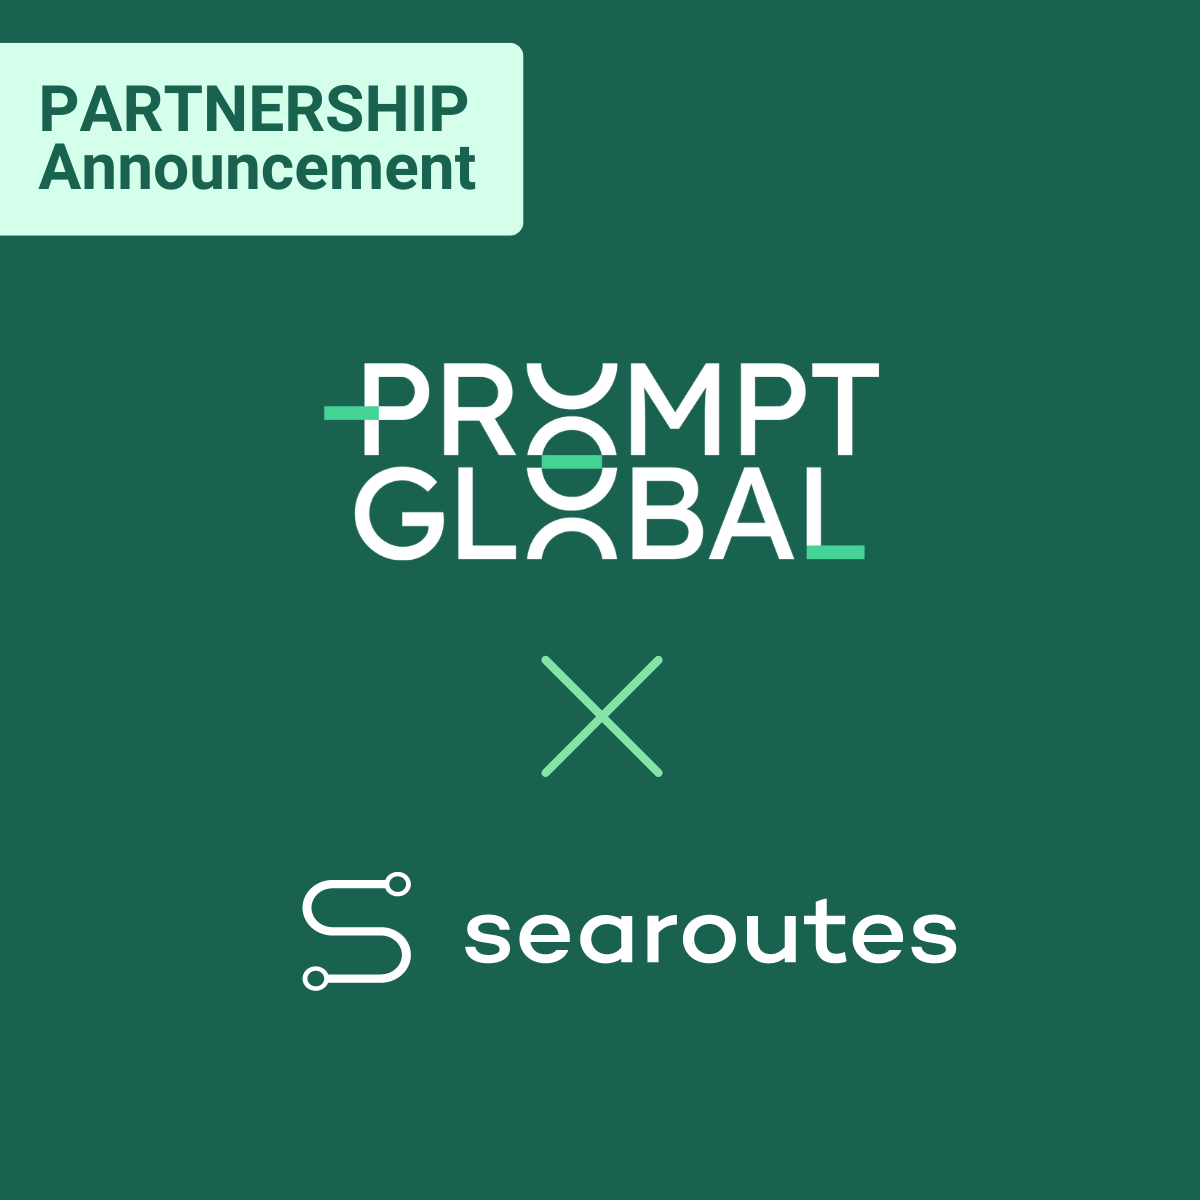 Prompt Global and Searoutes partnership announcement